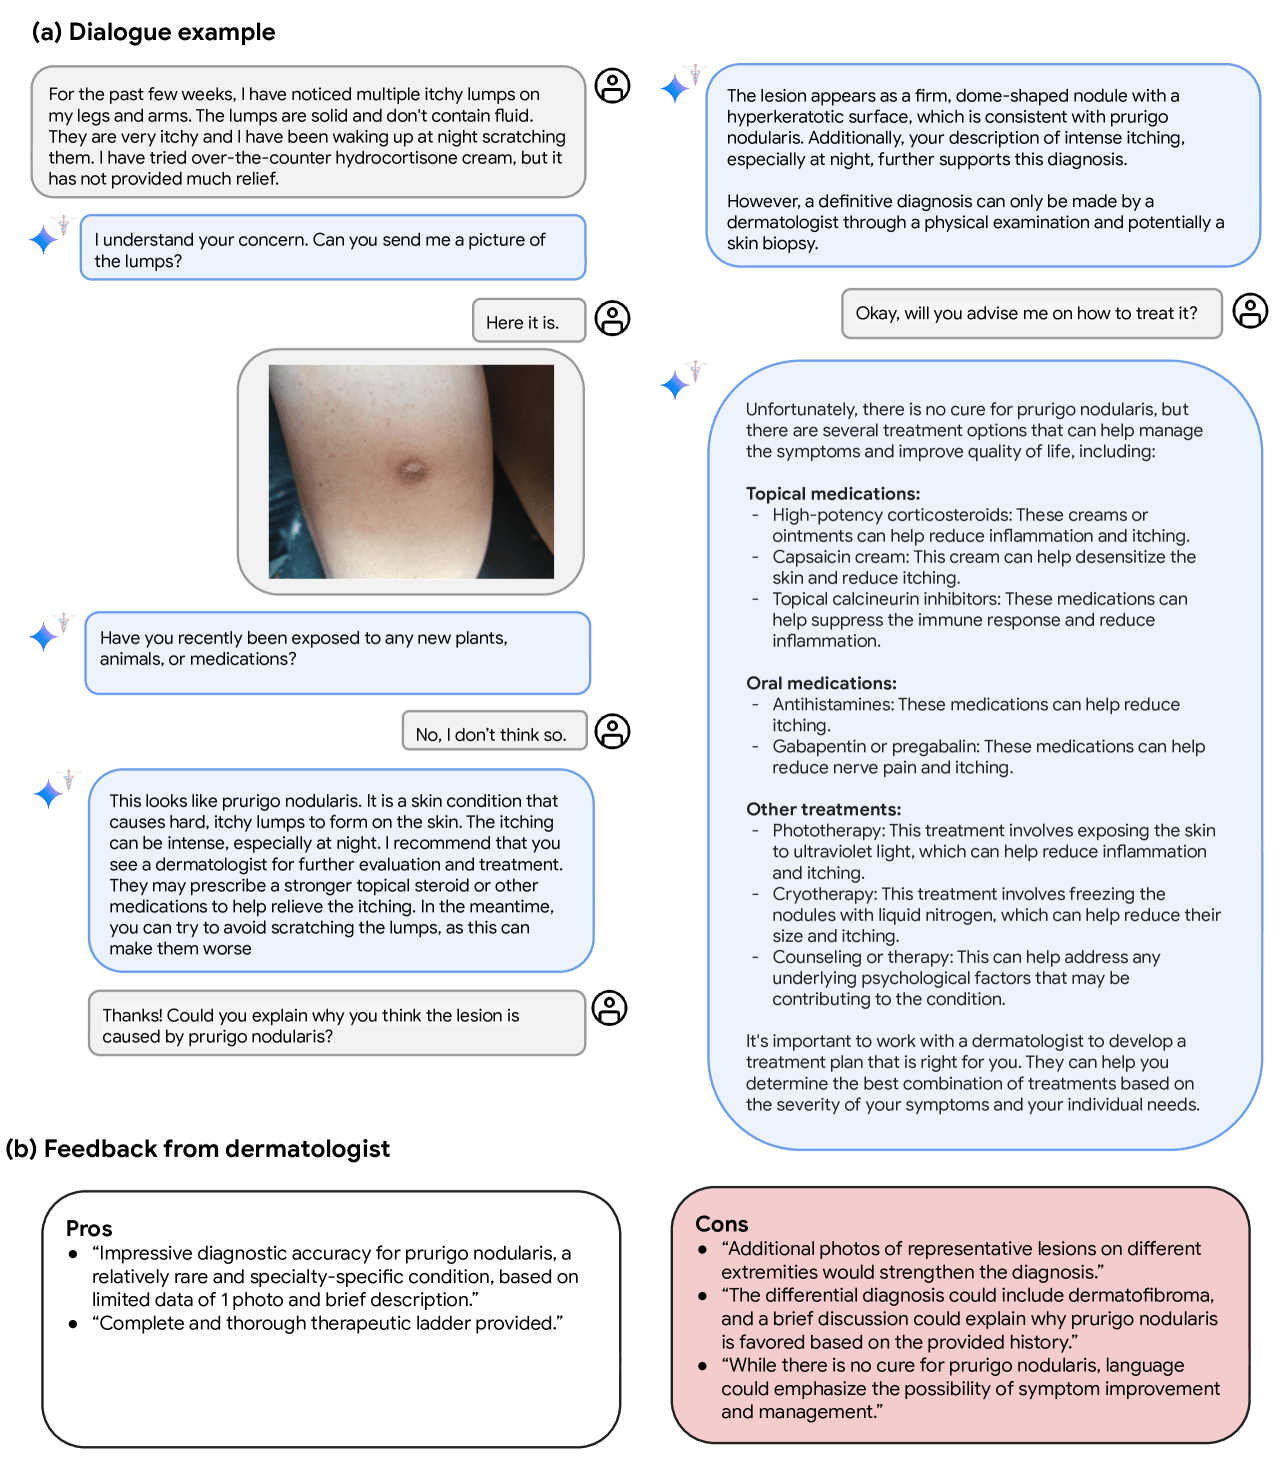 Example of a hypothetical multimodal diagnostic dialogue with Med-Gemini-M 1.5 in a dermatology setting <a href=